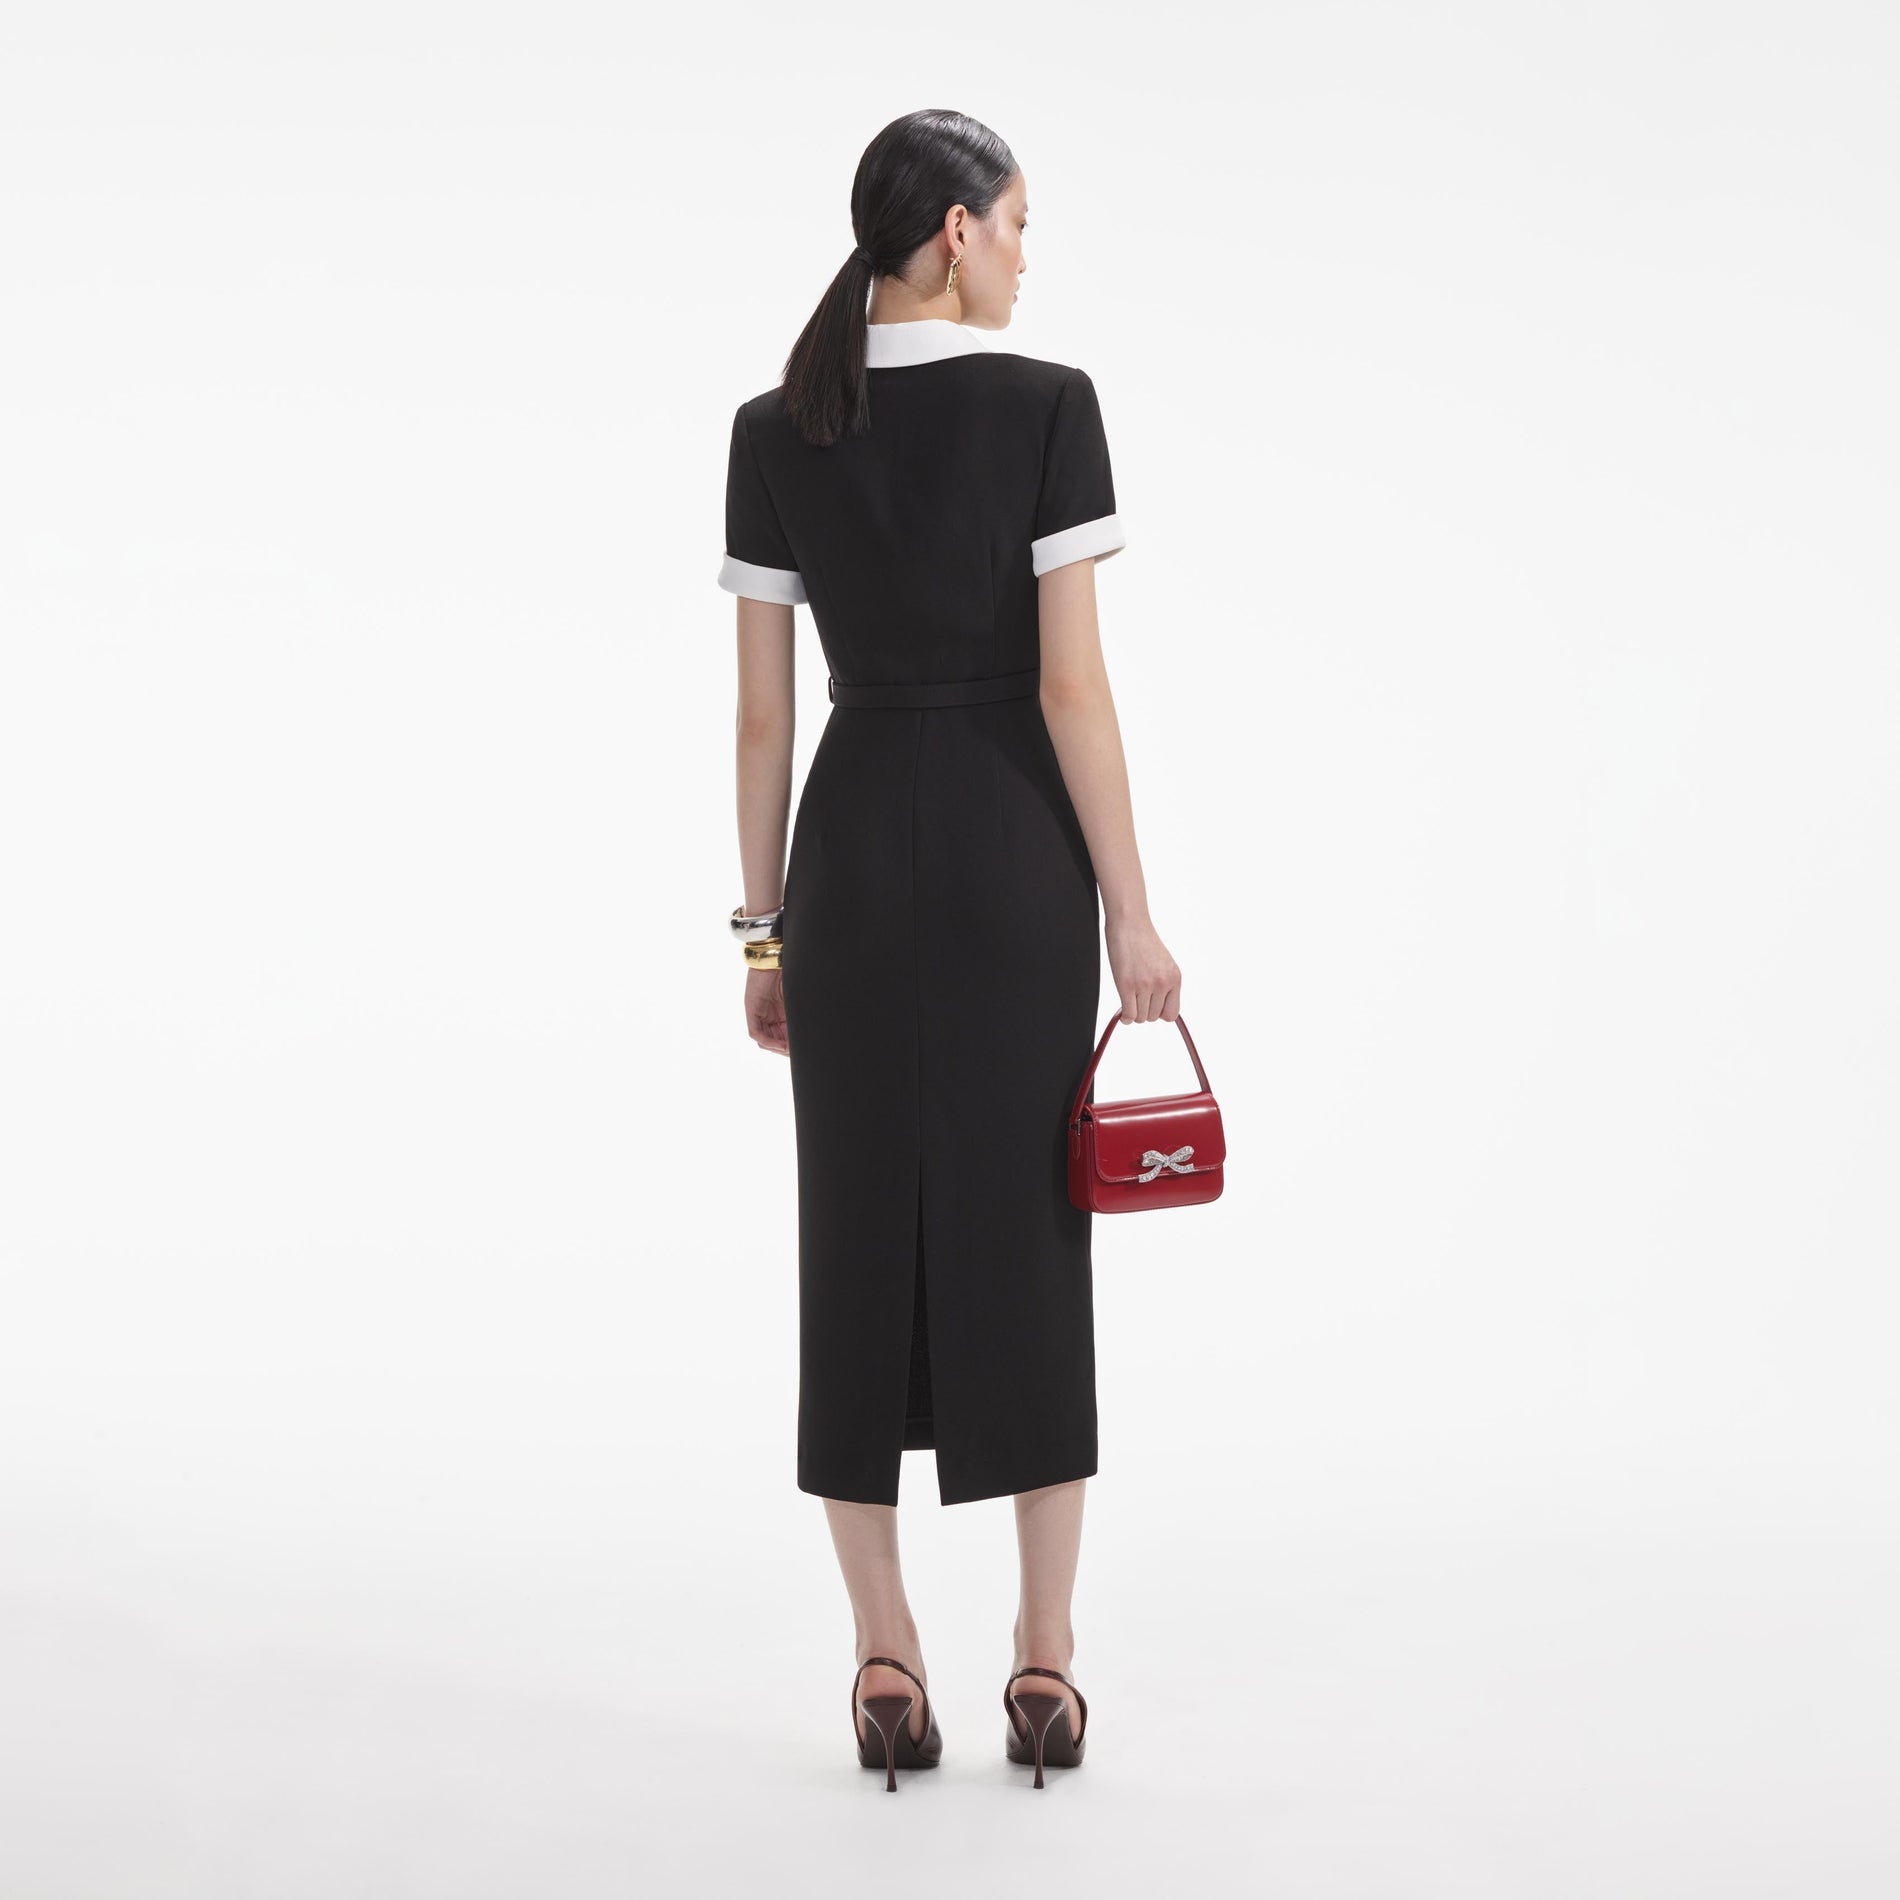 Back view of a woman wearing the White Black Crepe Contrast Midi Dress